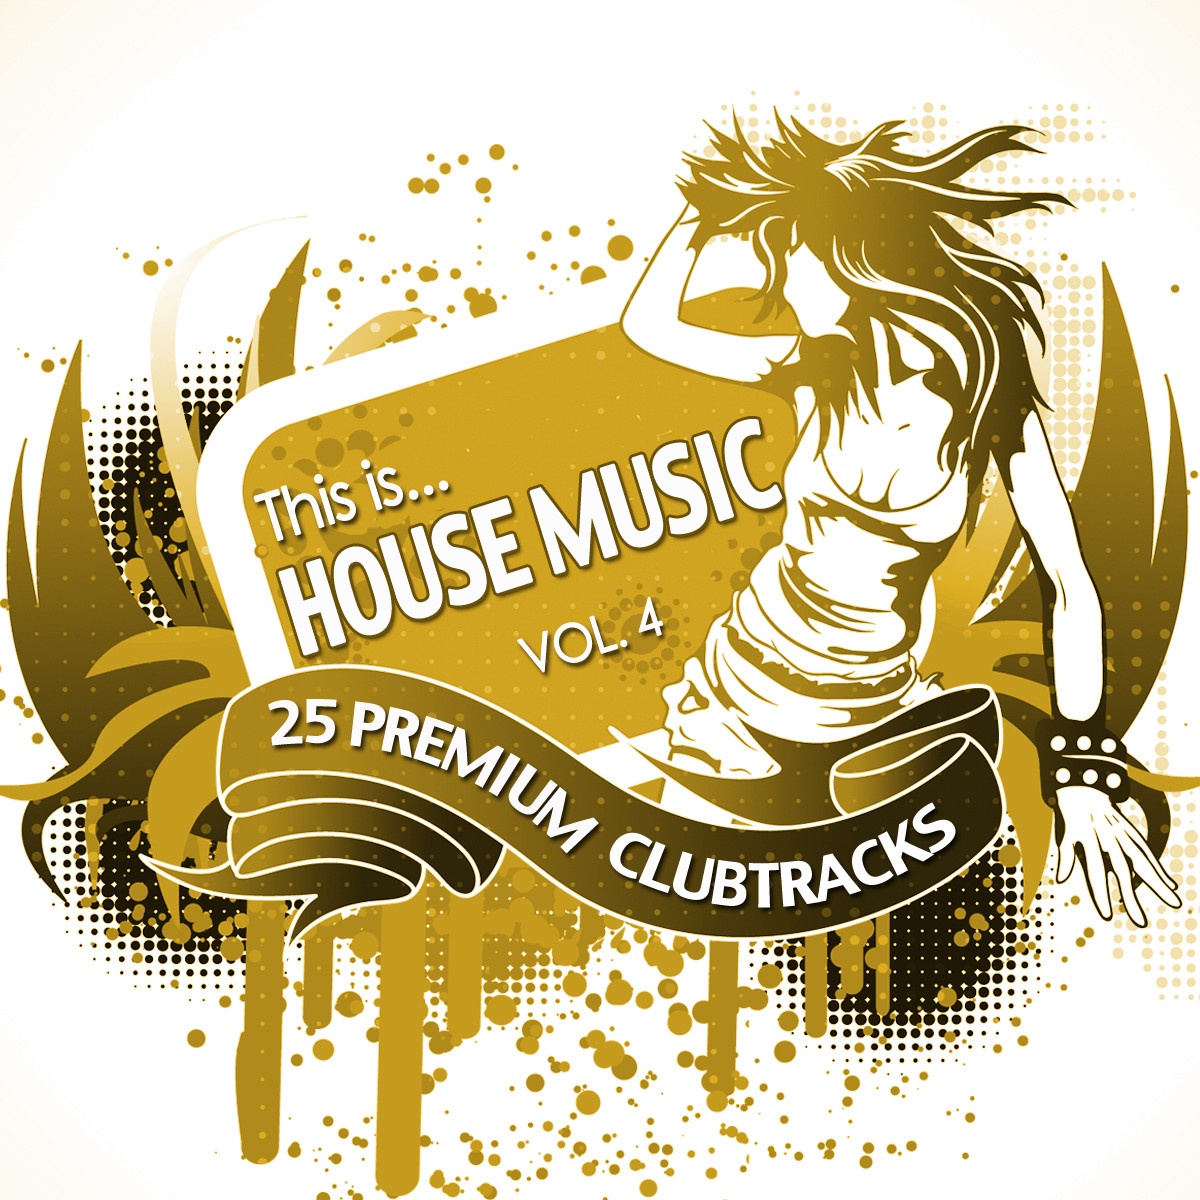 This Is...House Music, Vol. 4